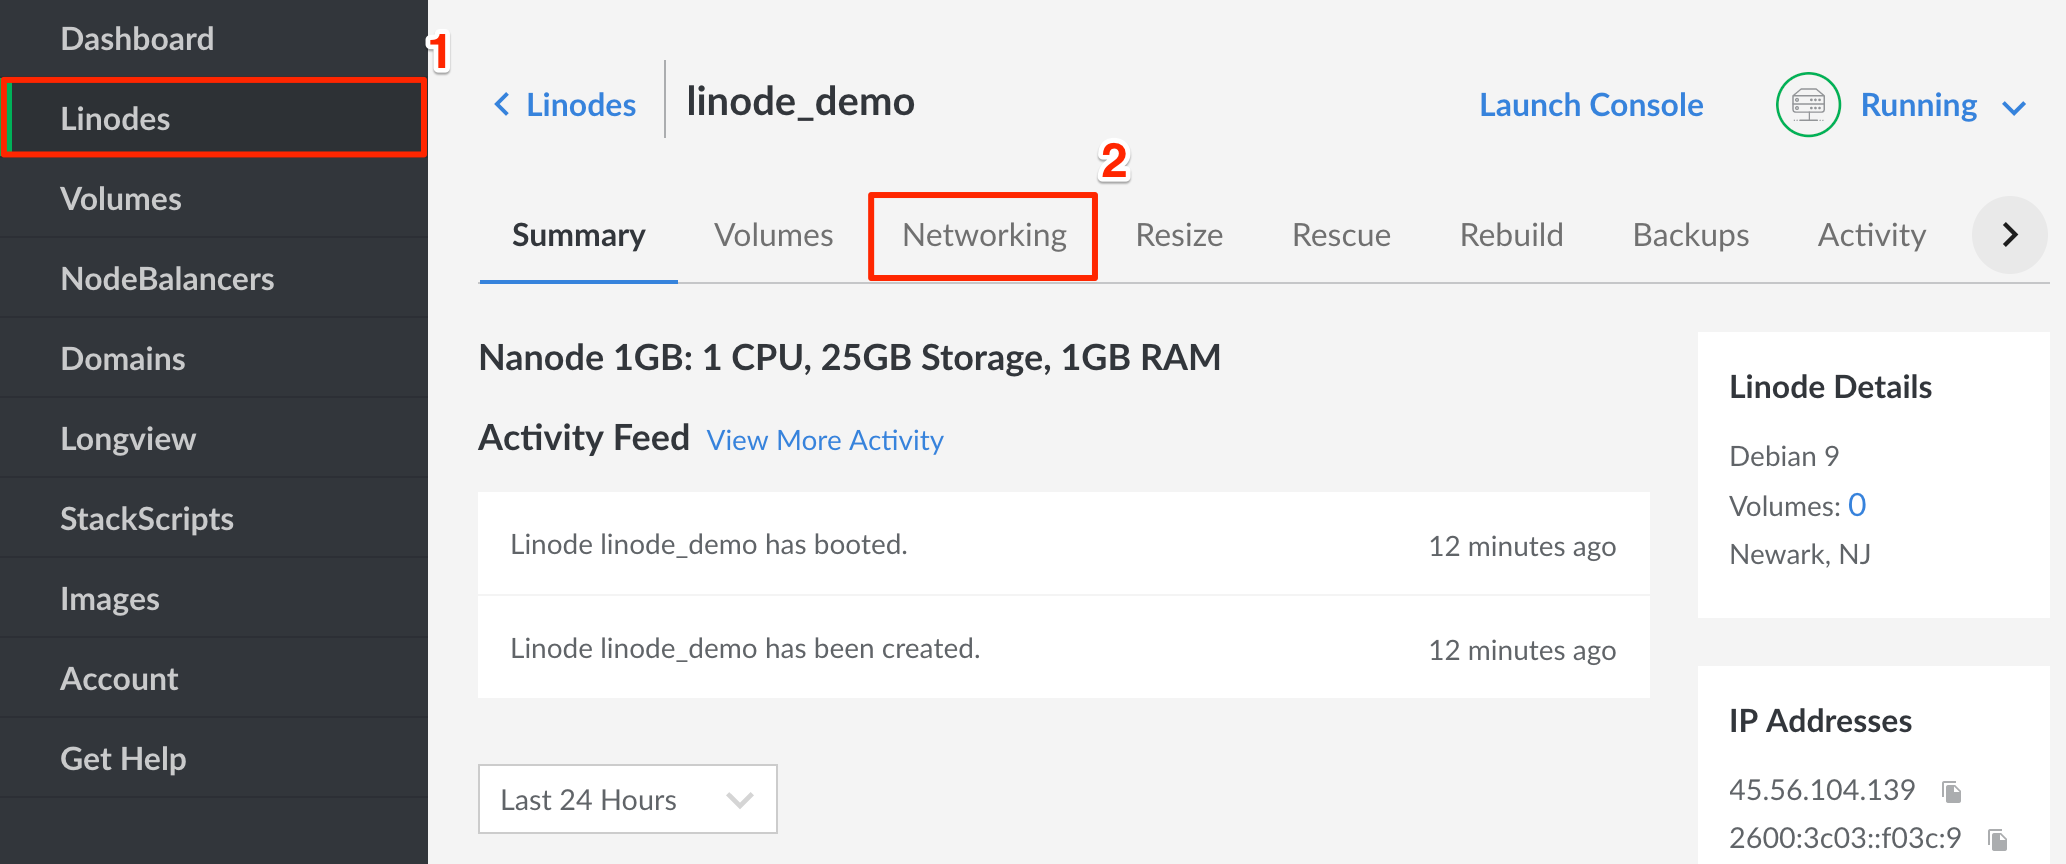 Linode Manager / Networking Tab